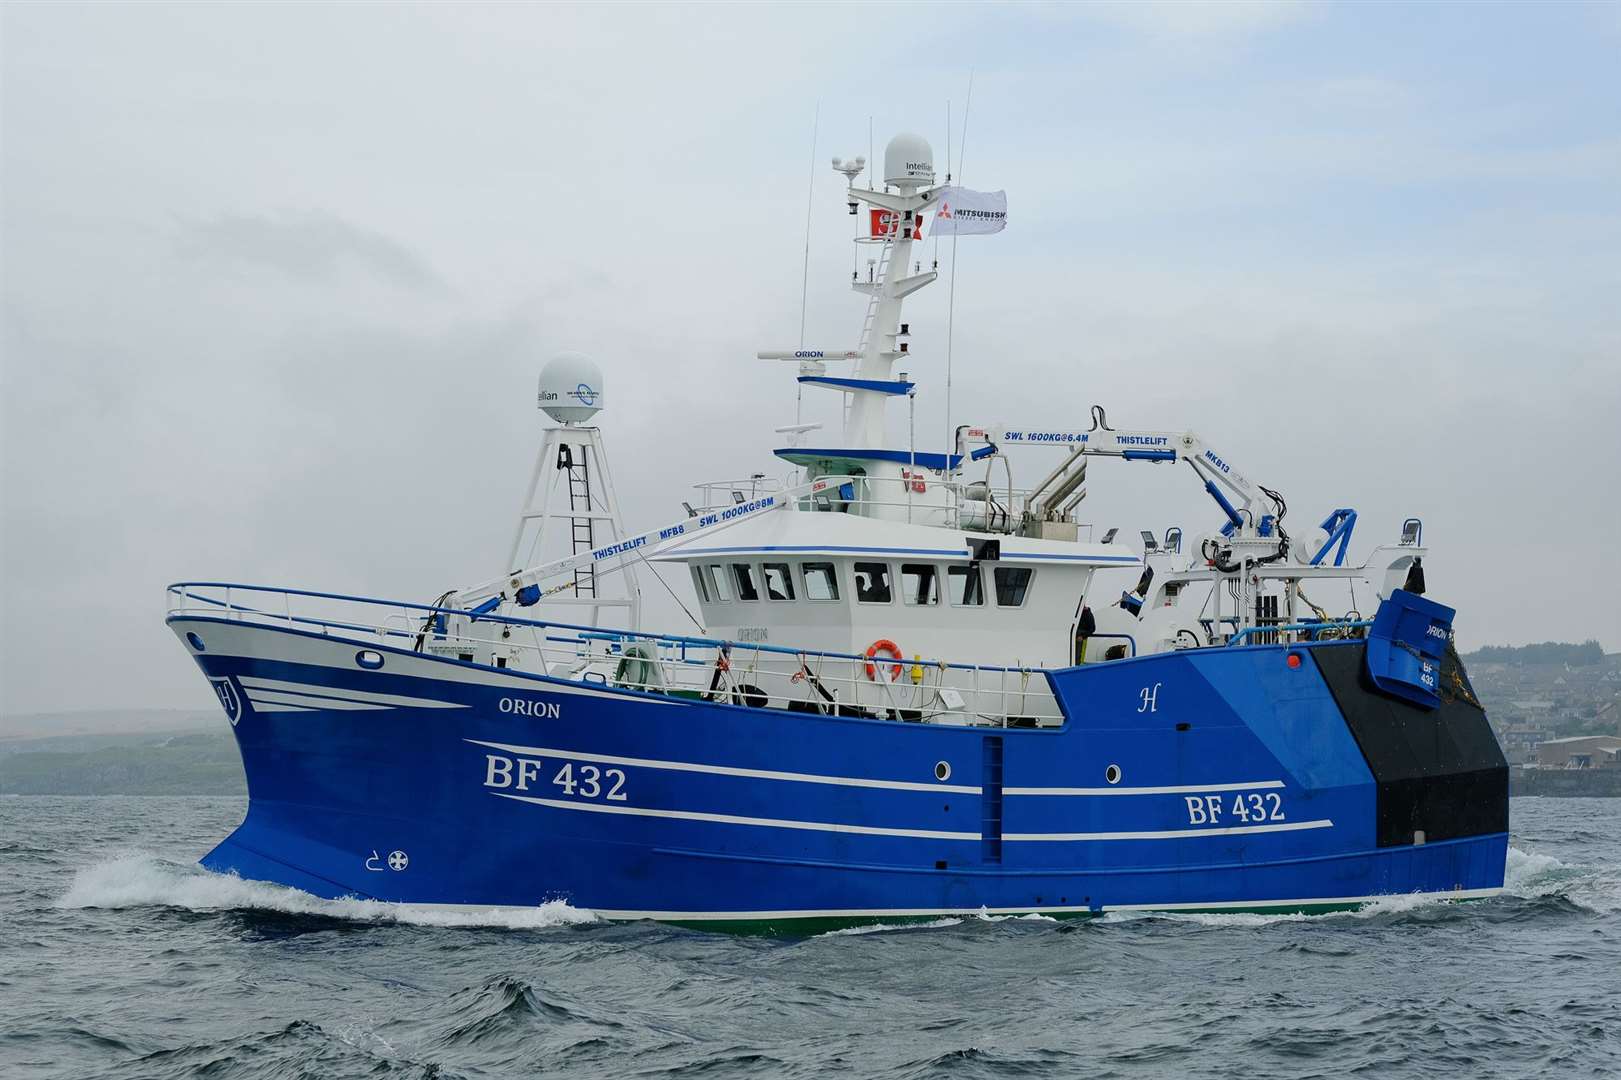 Orion is the latest fishing vessel completed by Macduff Shipyards.